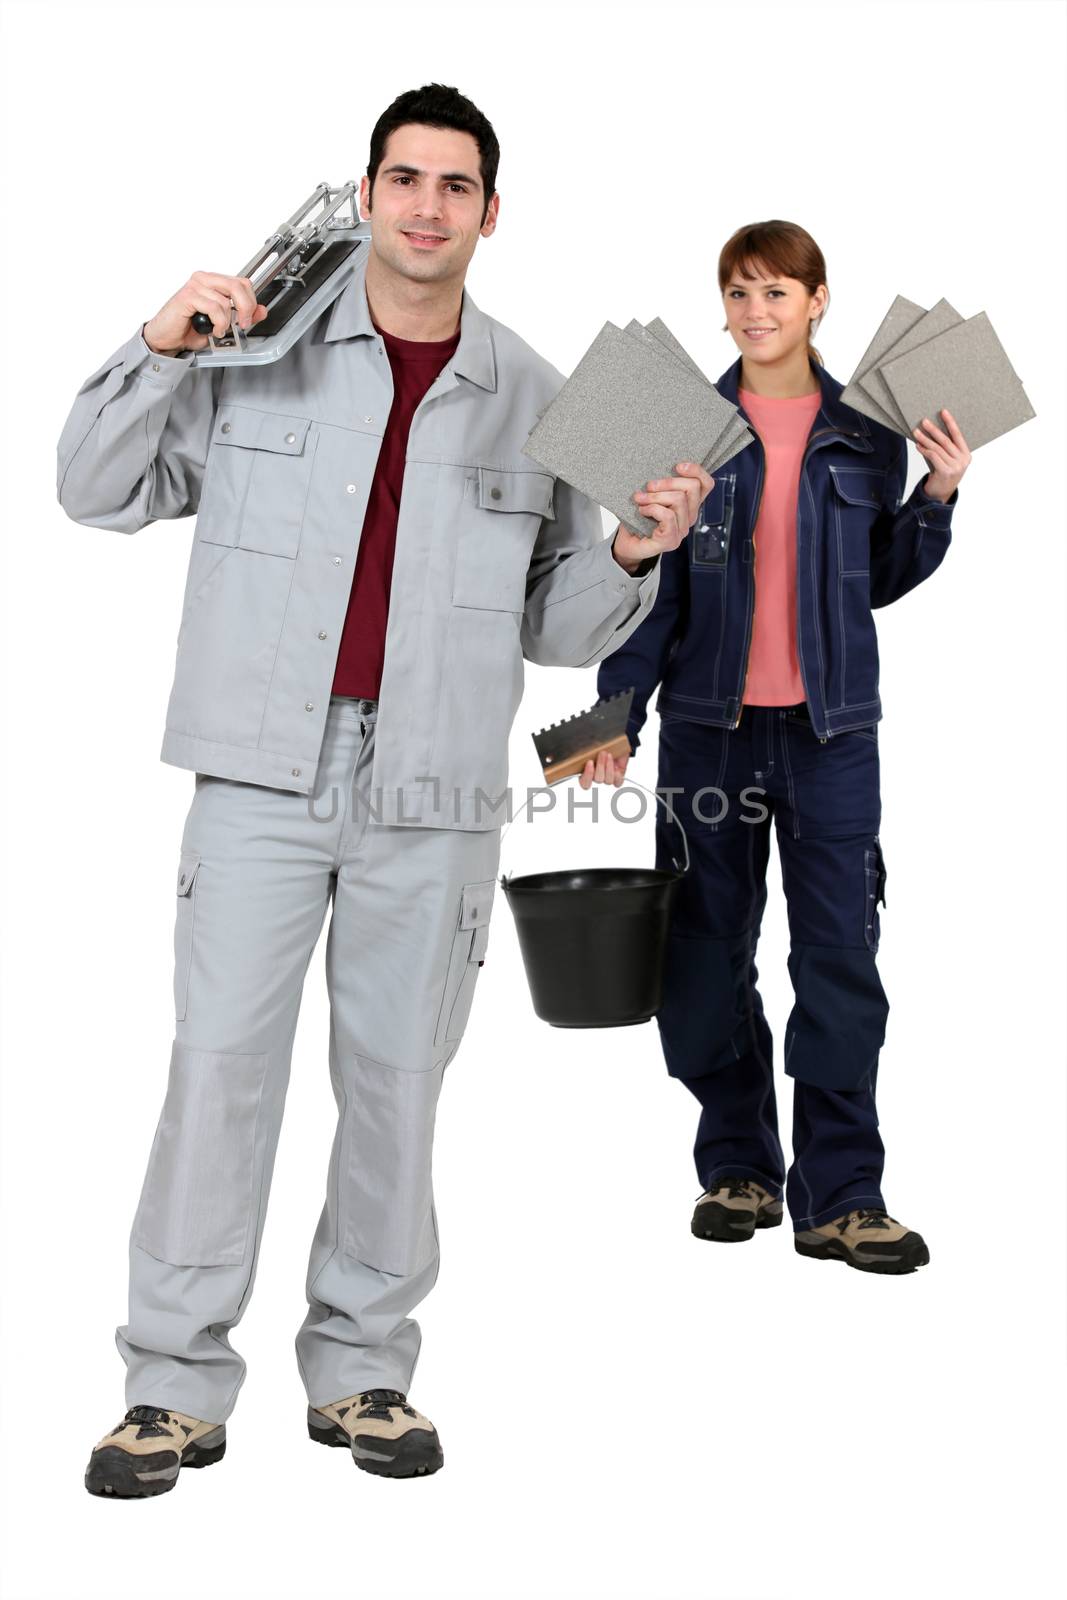 Tile fitters holding up their building supplies and tools by phovoir